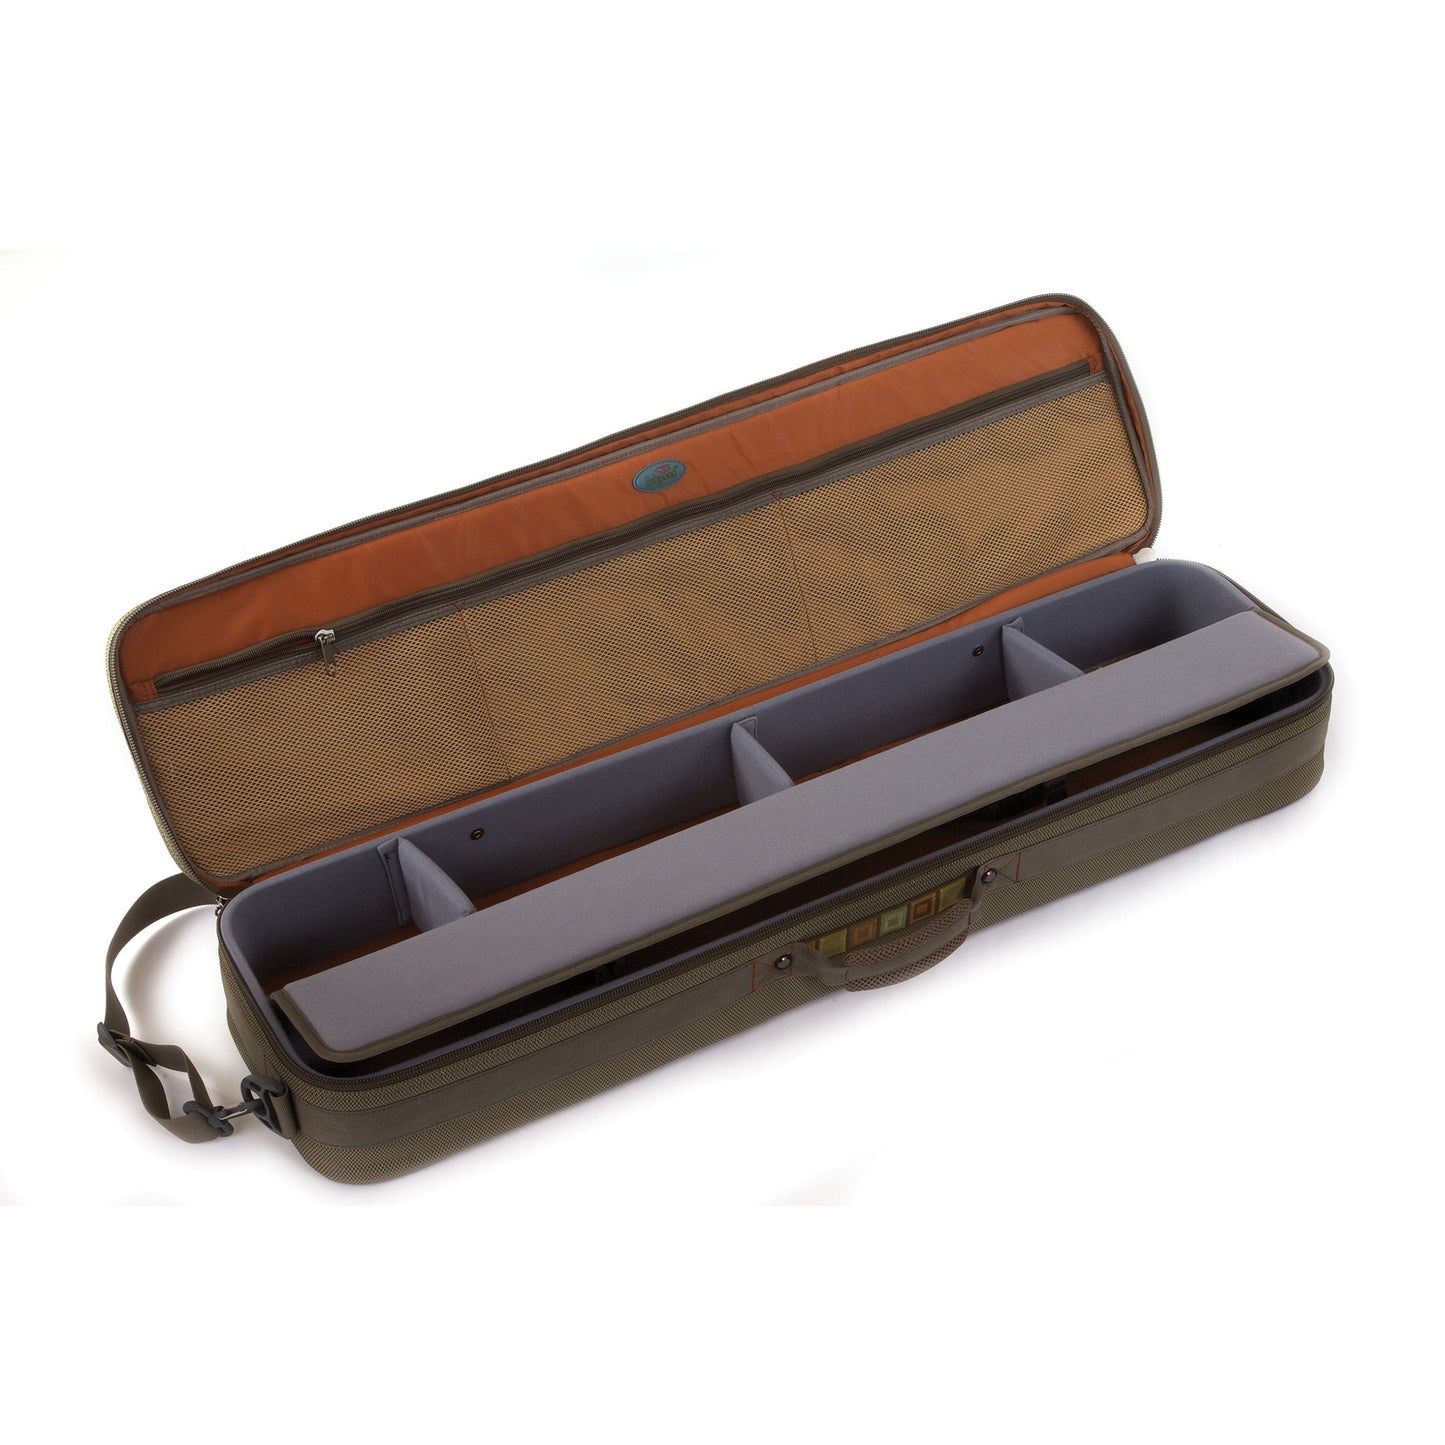 Fishpond / Fish Pond Reel Case For Your Fishing Reels - sporting